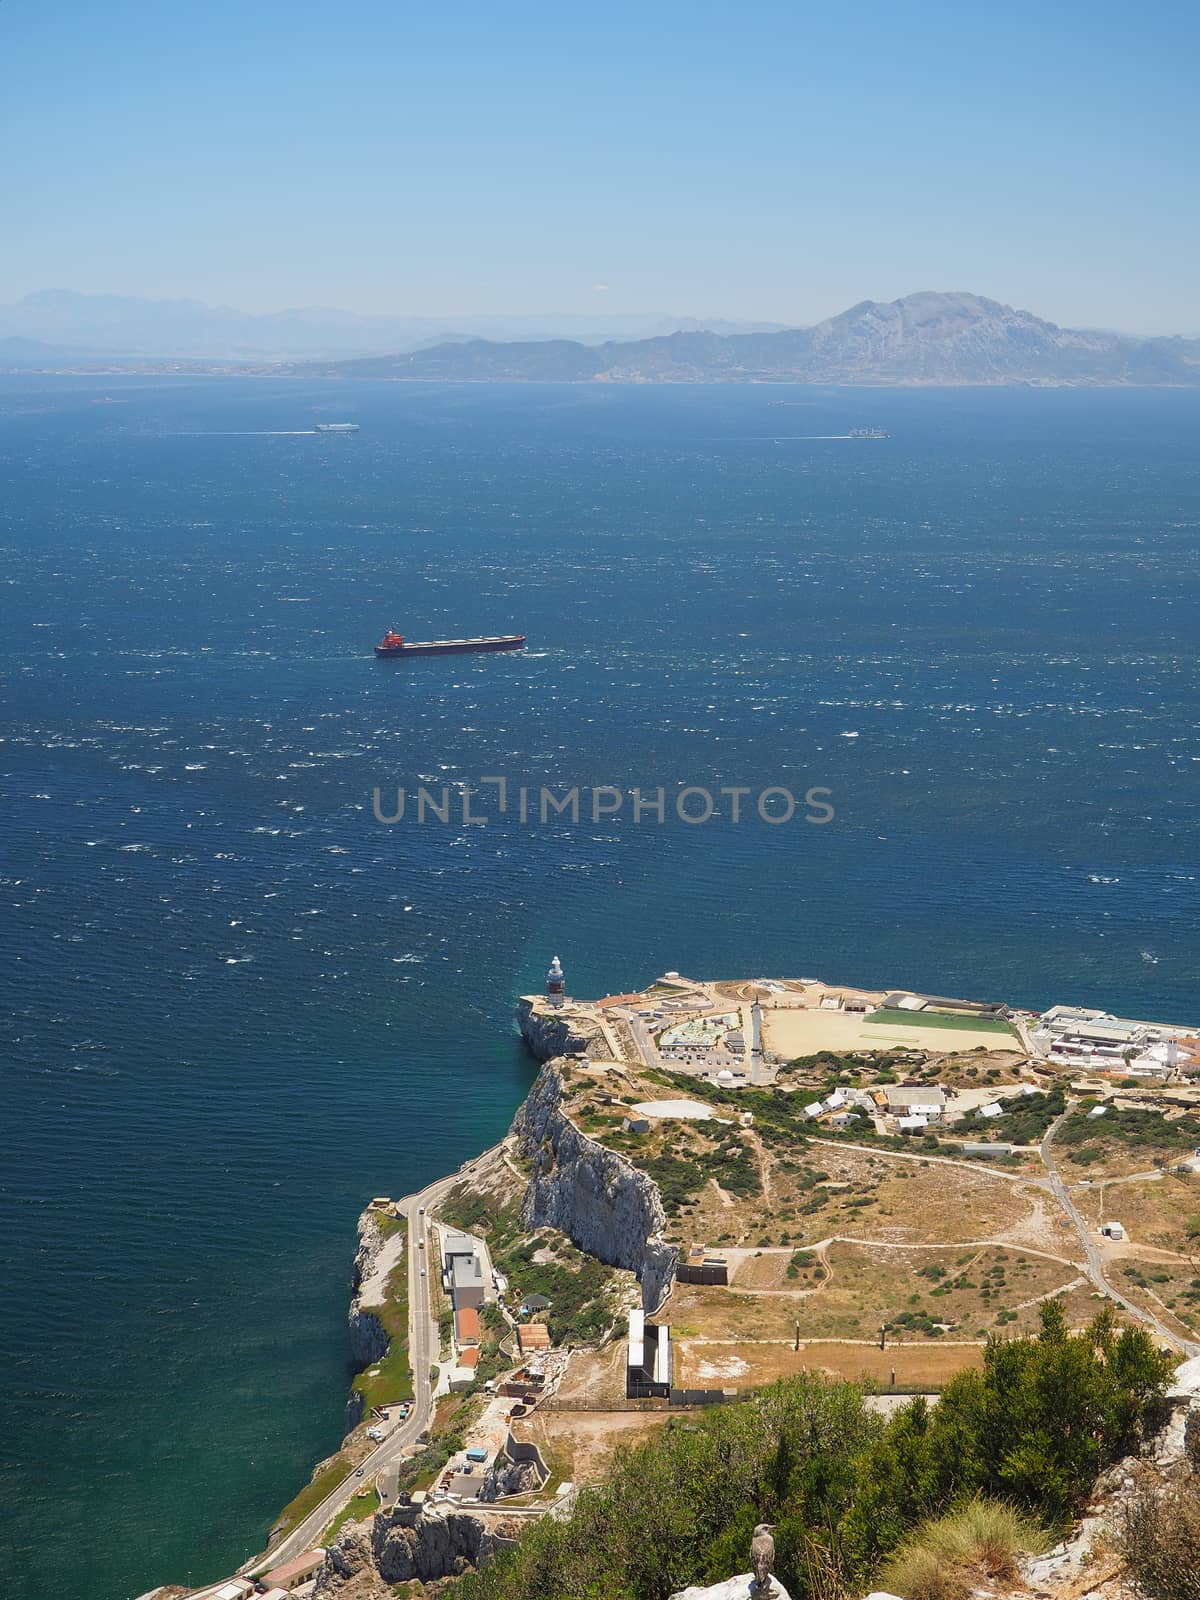 View from the top of the Rock of Gibraltar across the Strait of Gibraltar with passing container ship and Morocco in the distance